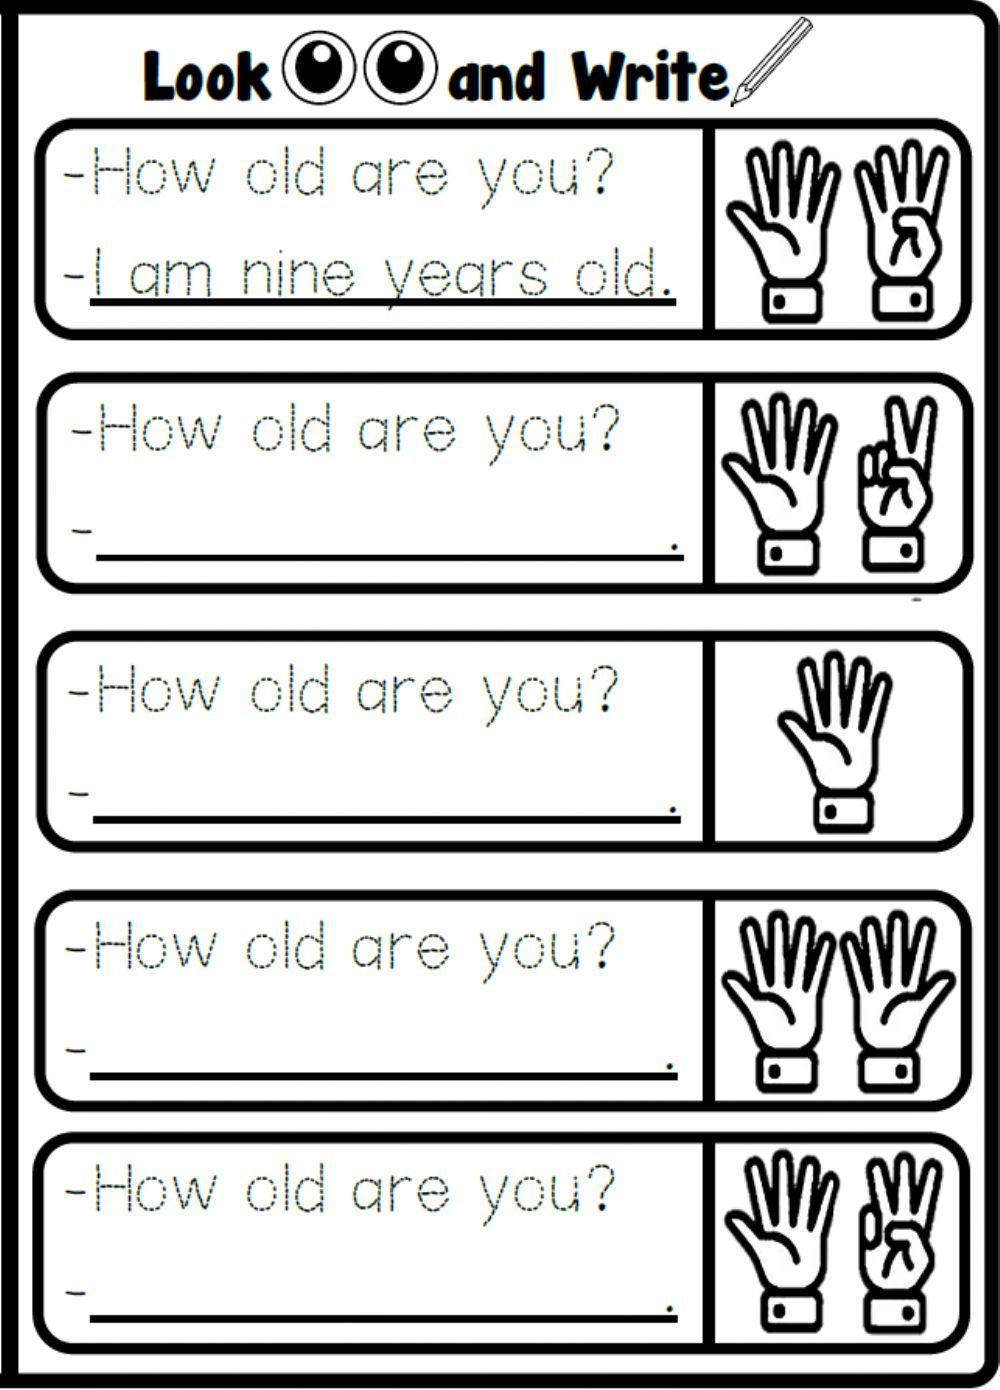 2.4. Numbers - How old are you?